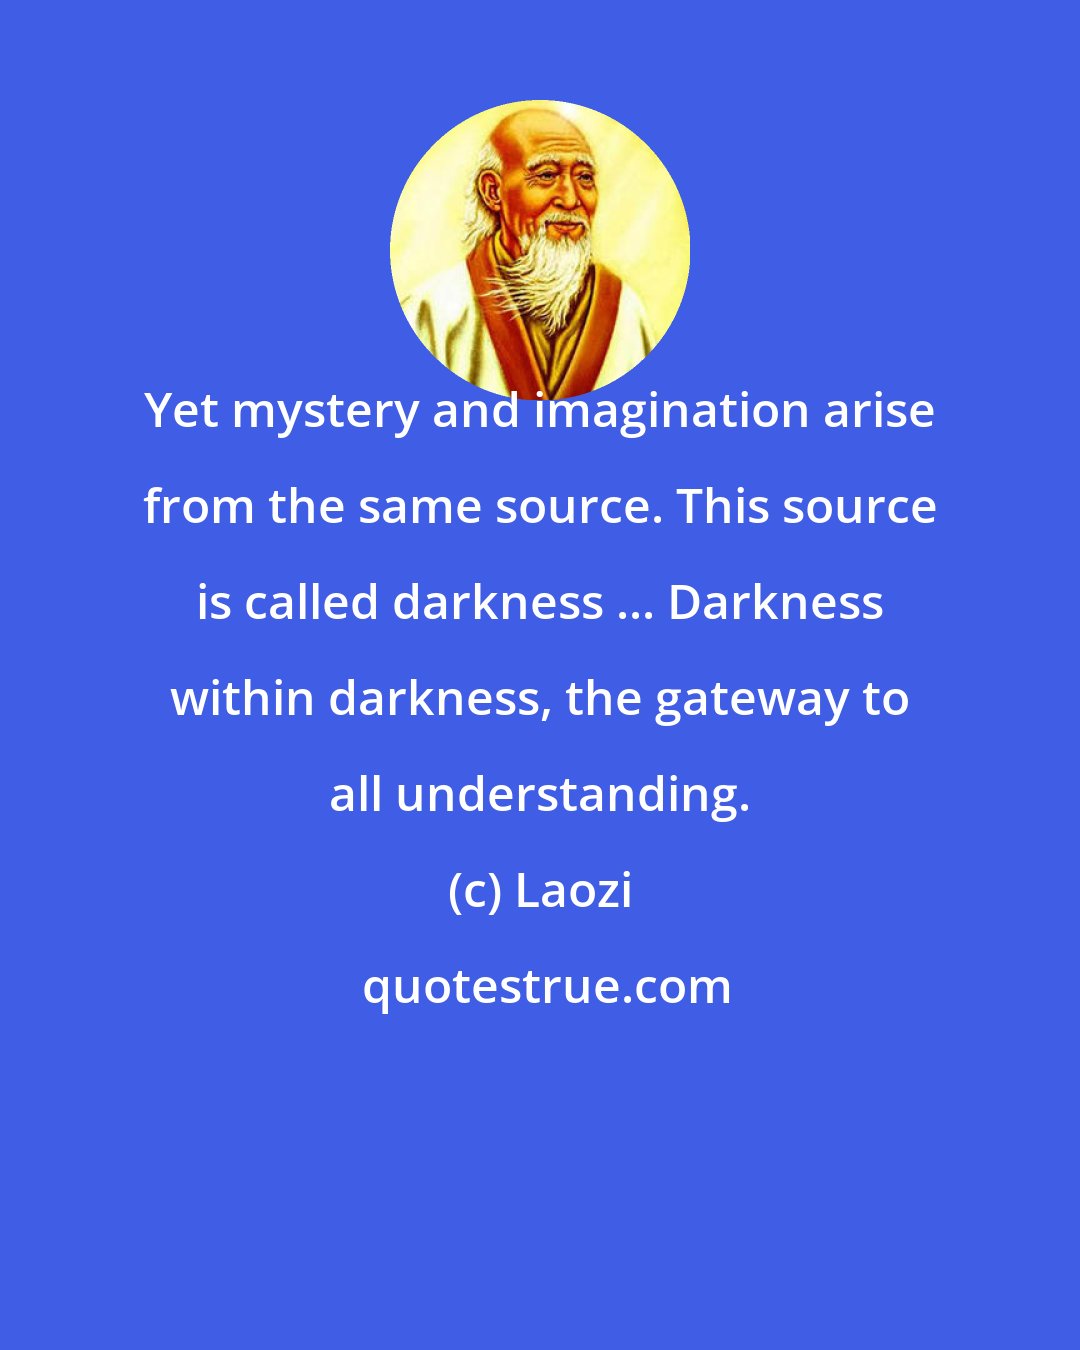 Laozi: Yet mystery and imagination arise from the same source. This source is called darkness ... Darkness within darkness, the gateway to all understanding.